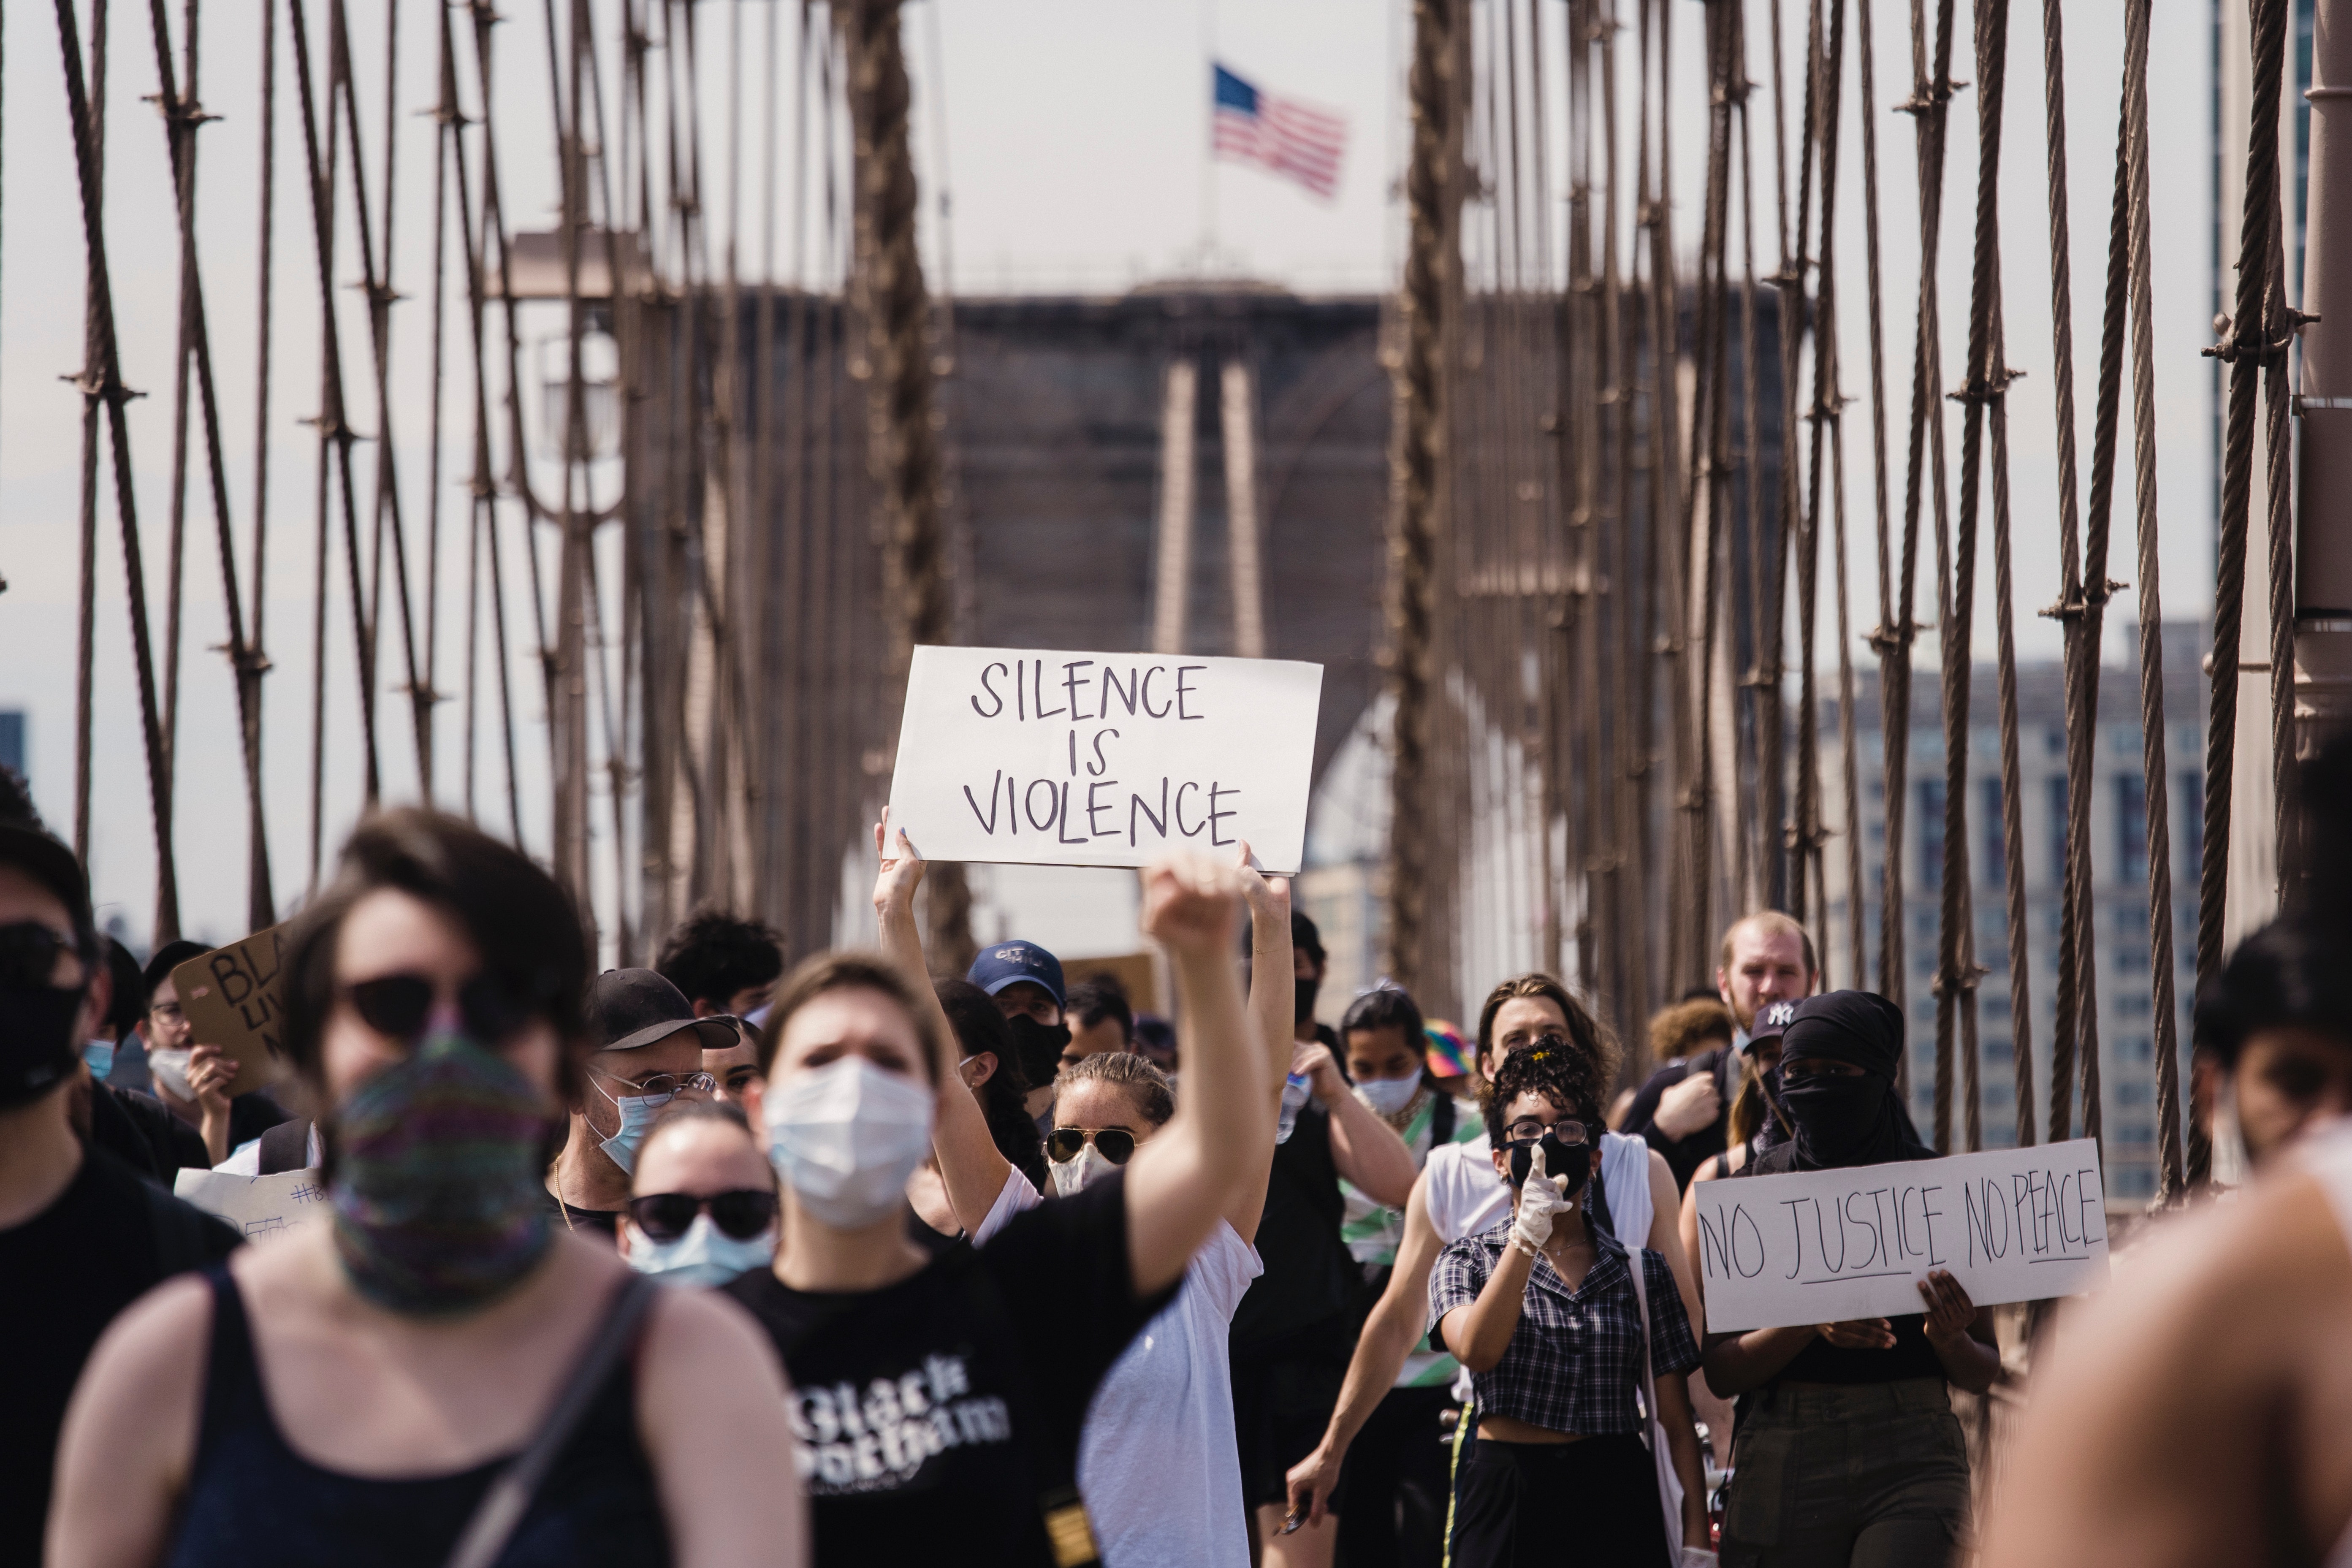 photo of peaceful protest on bridge with american flag in background and person in foreground holding sign that says 'Silence is Violence'